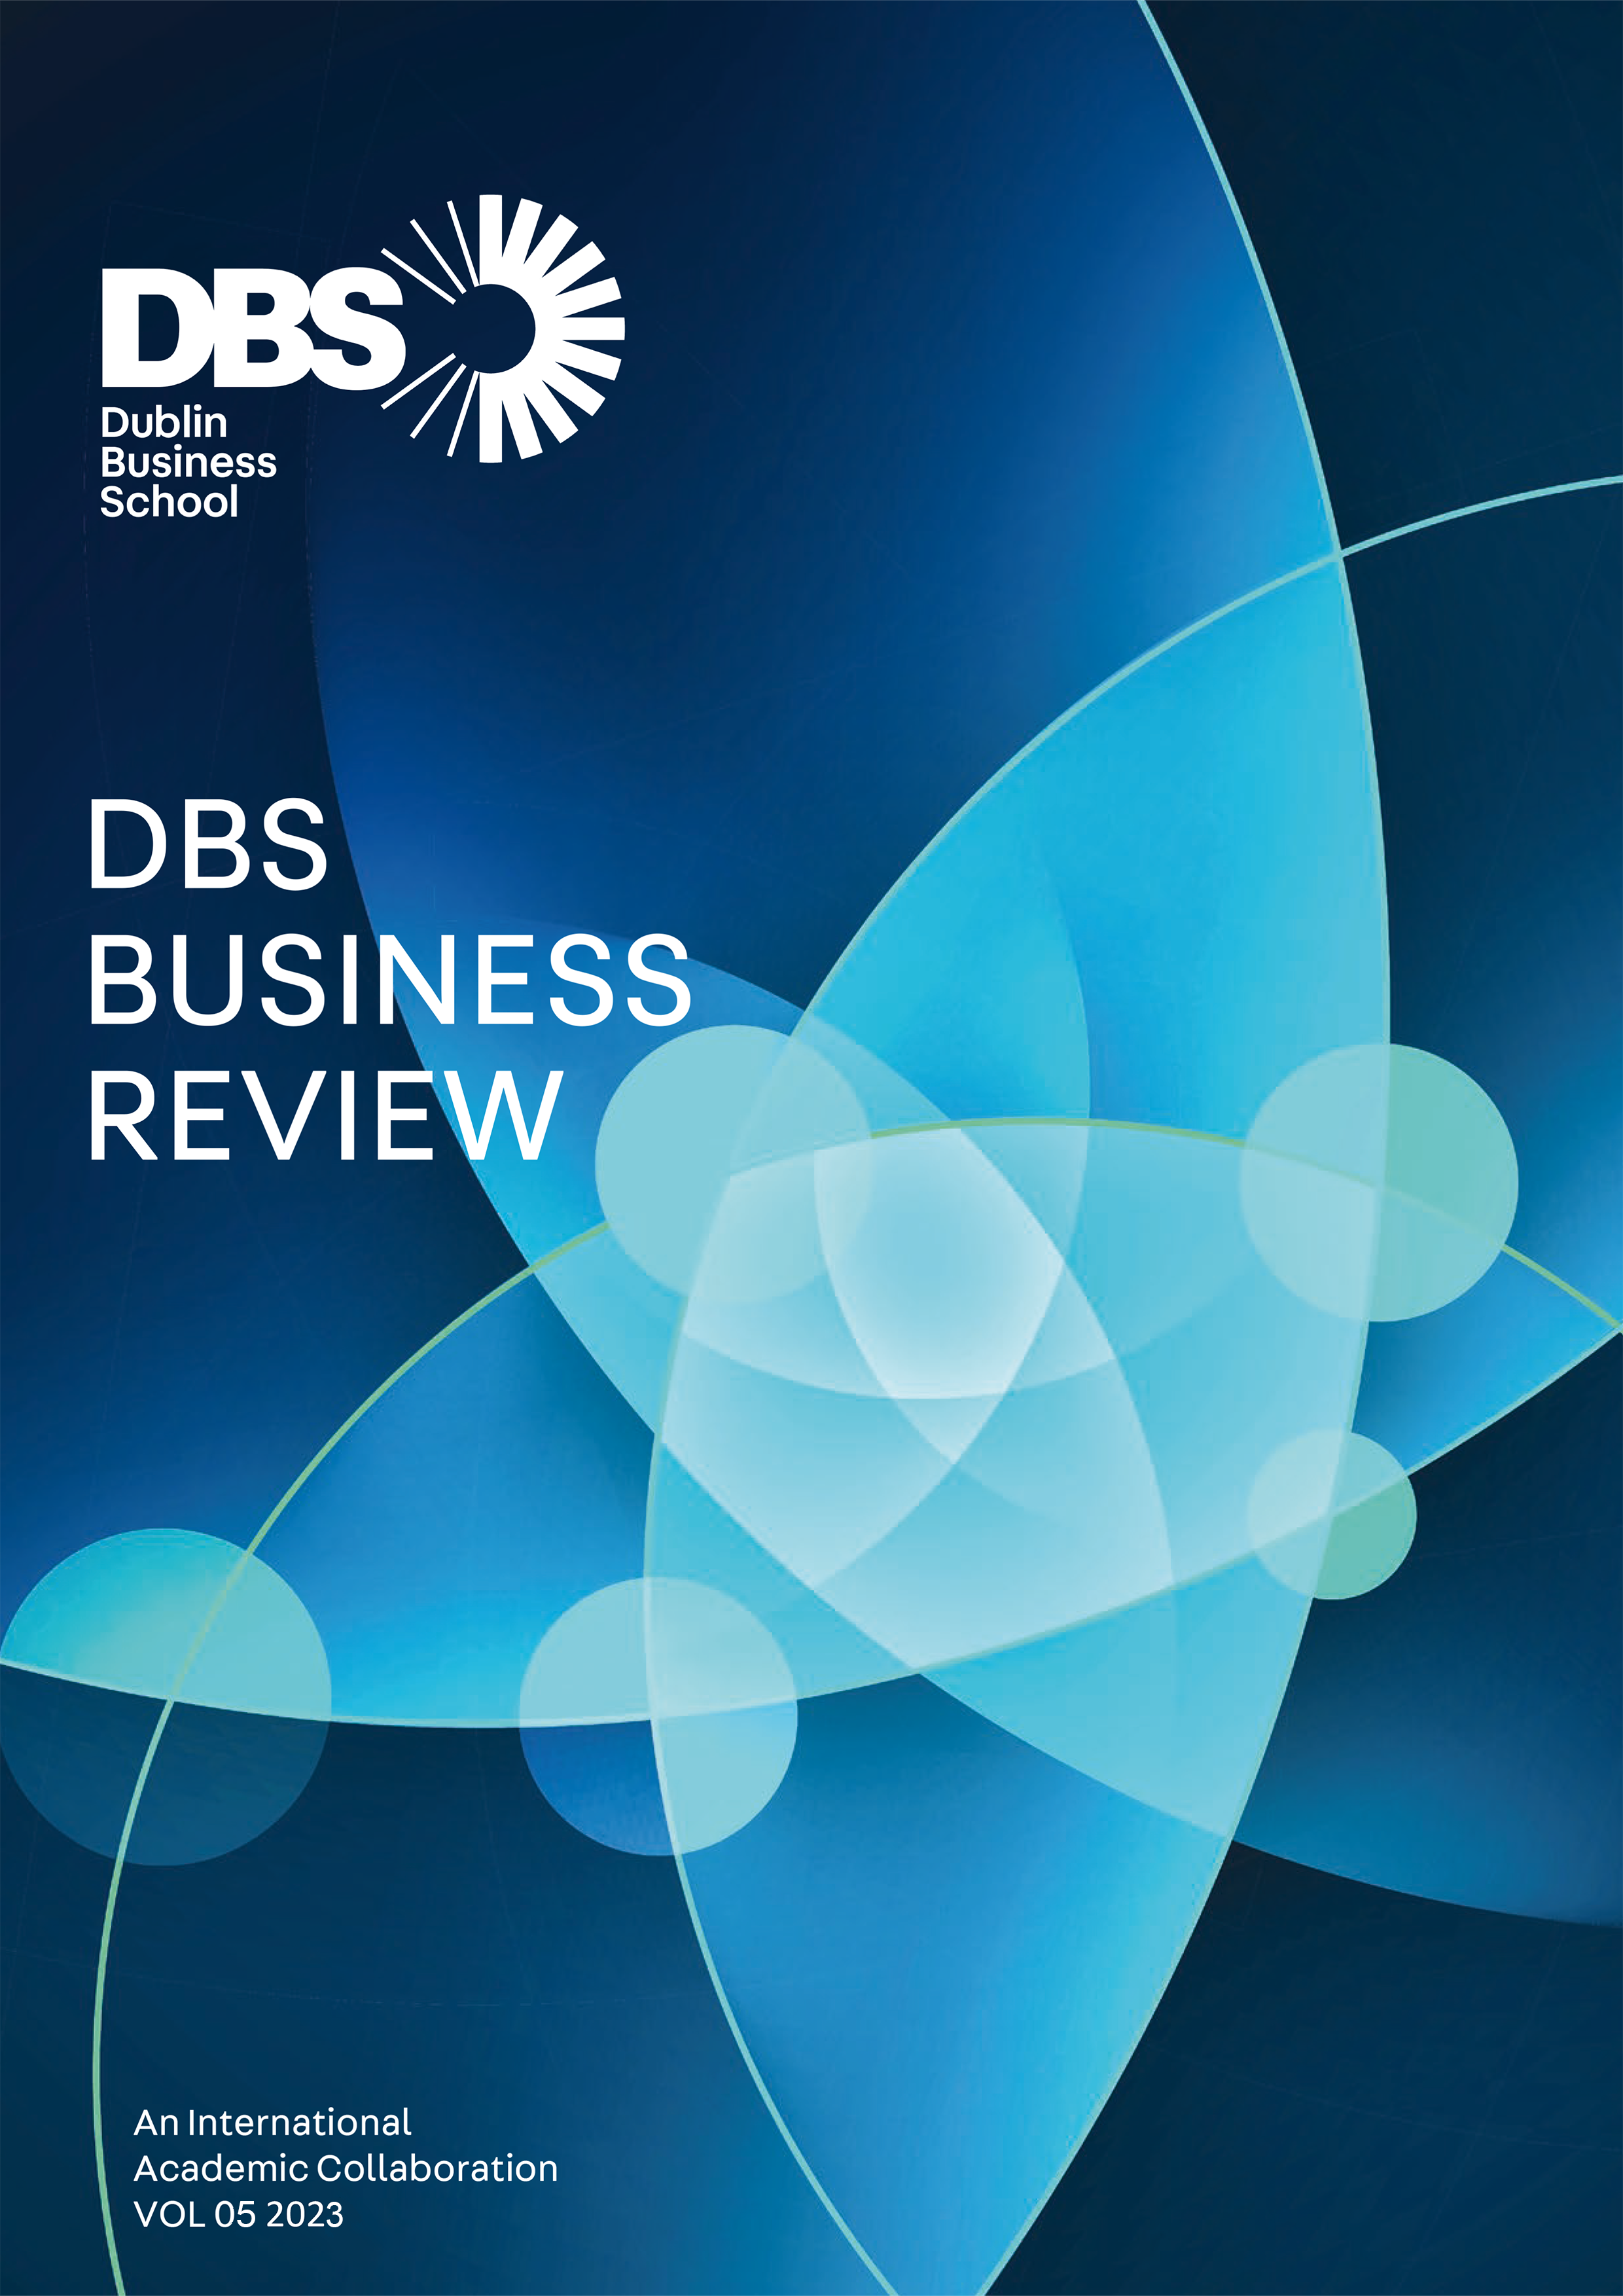 Cover image of the DBS journal showing the Dublin Business School logo, the title DBS Business Review and the lettering VOL 05 2023 at the bottom of the image.